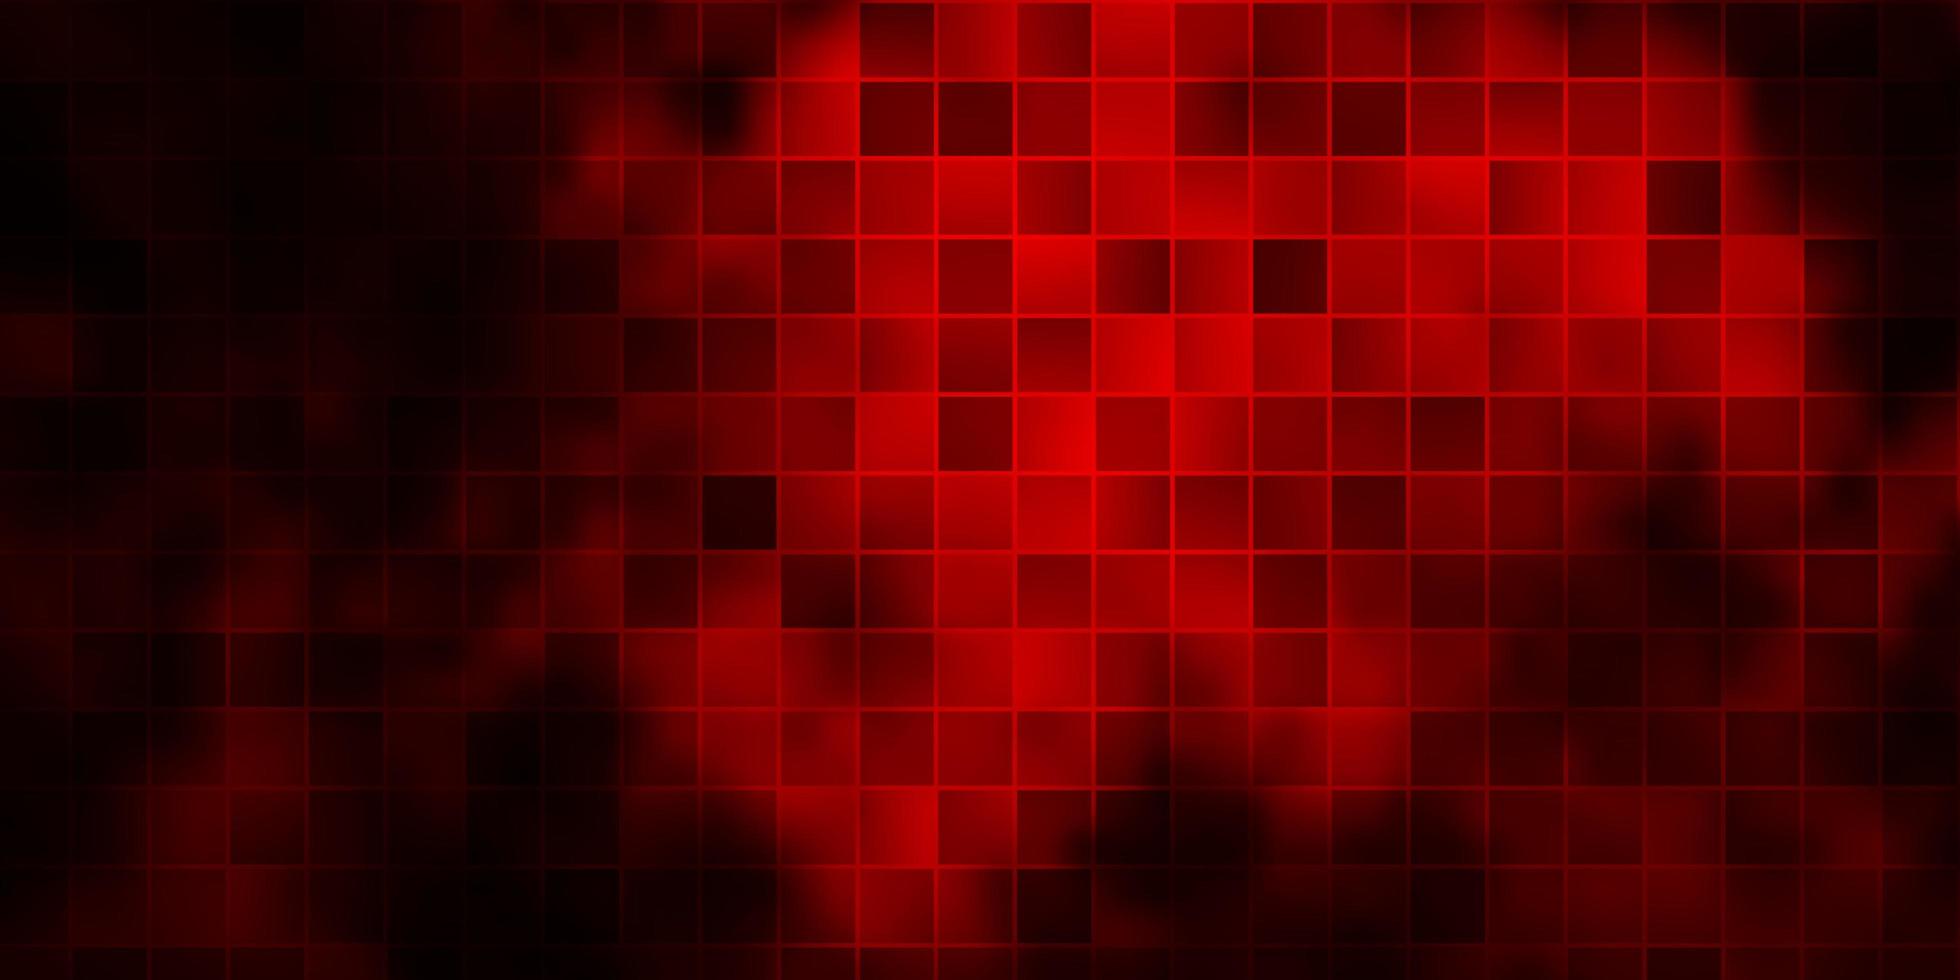 Dark Red vector background in polygonal style.